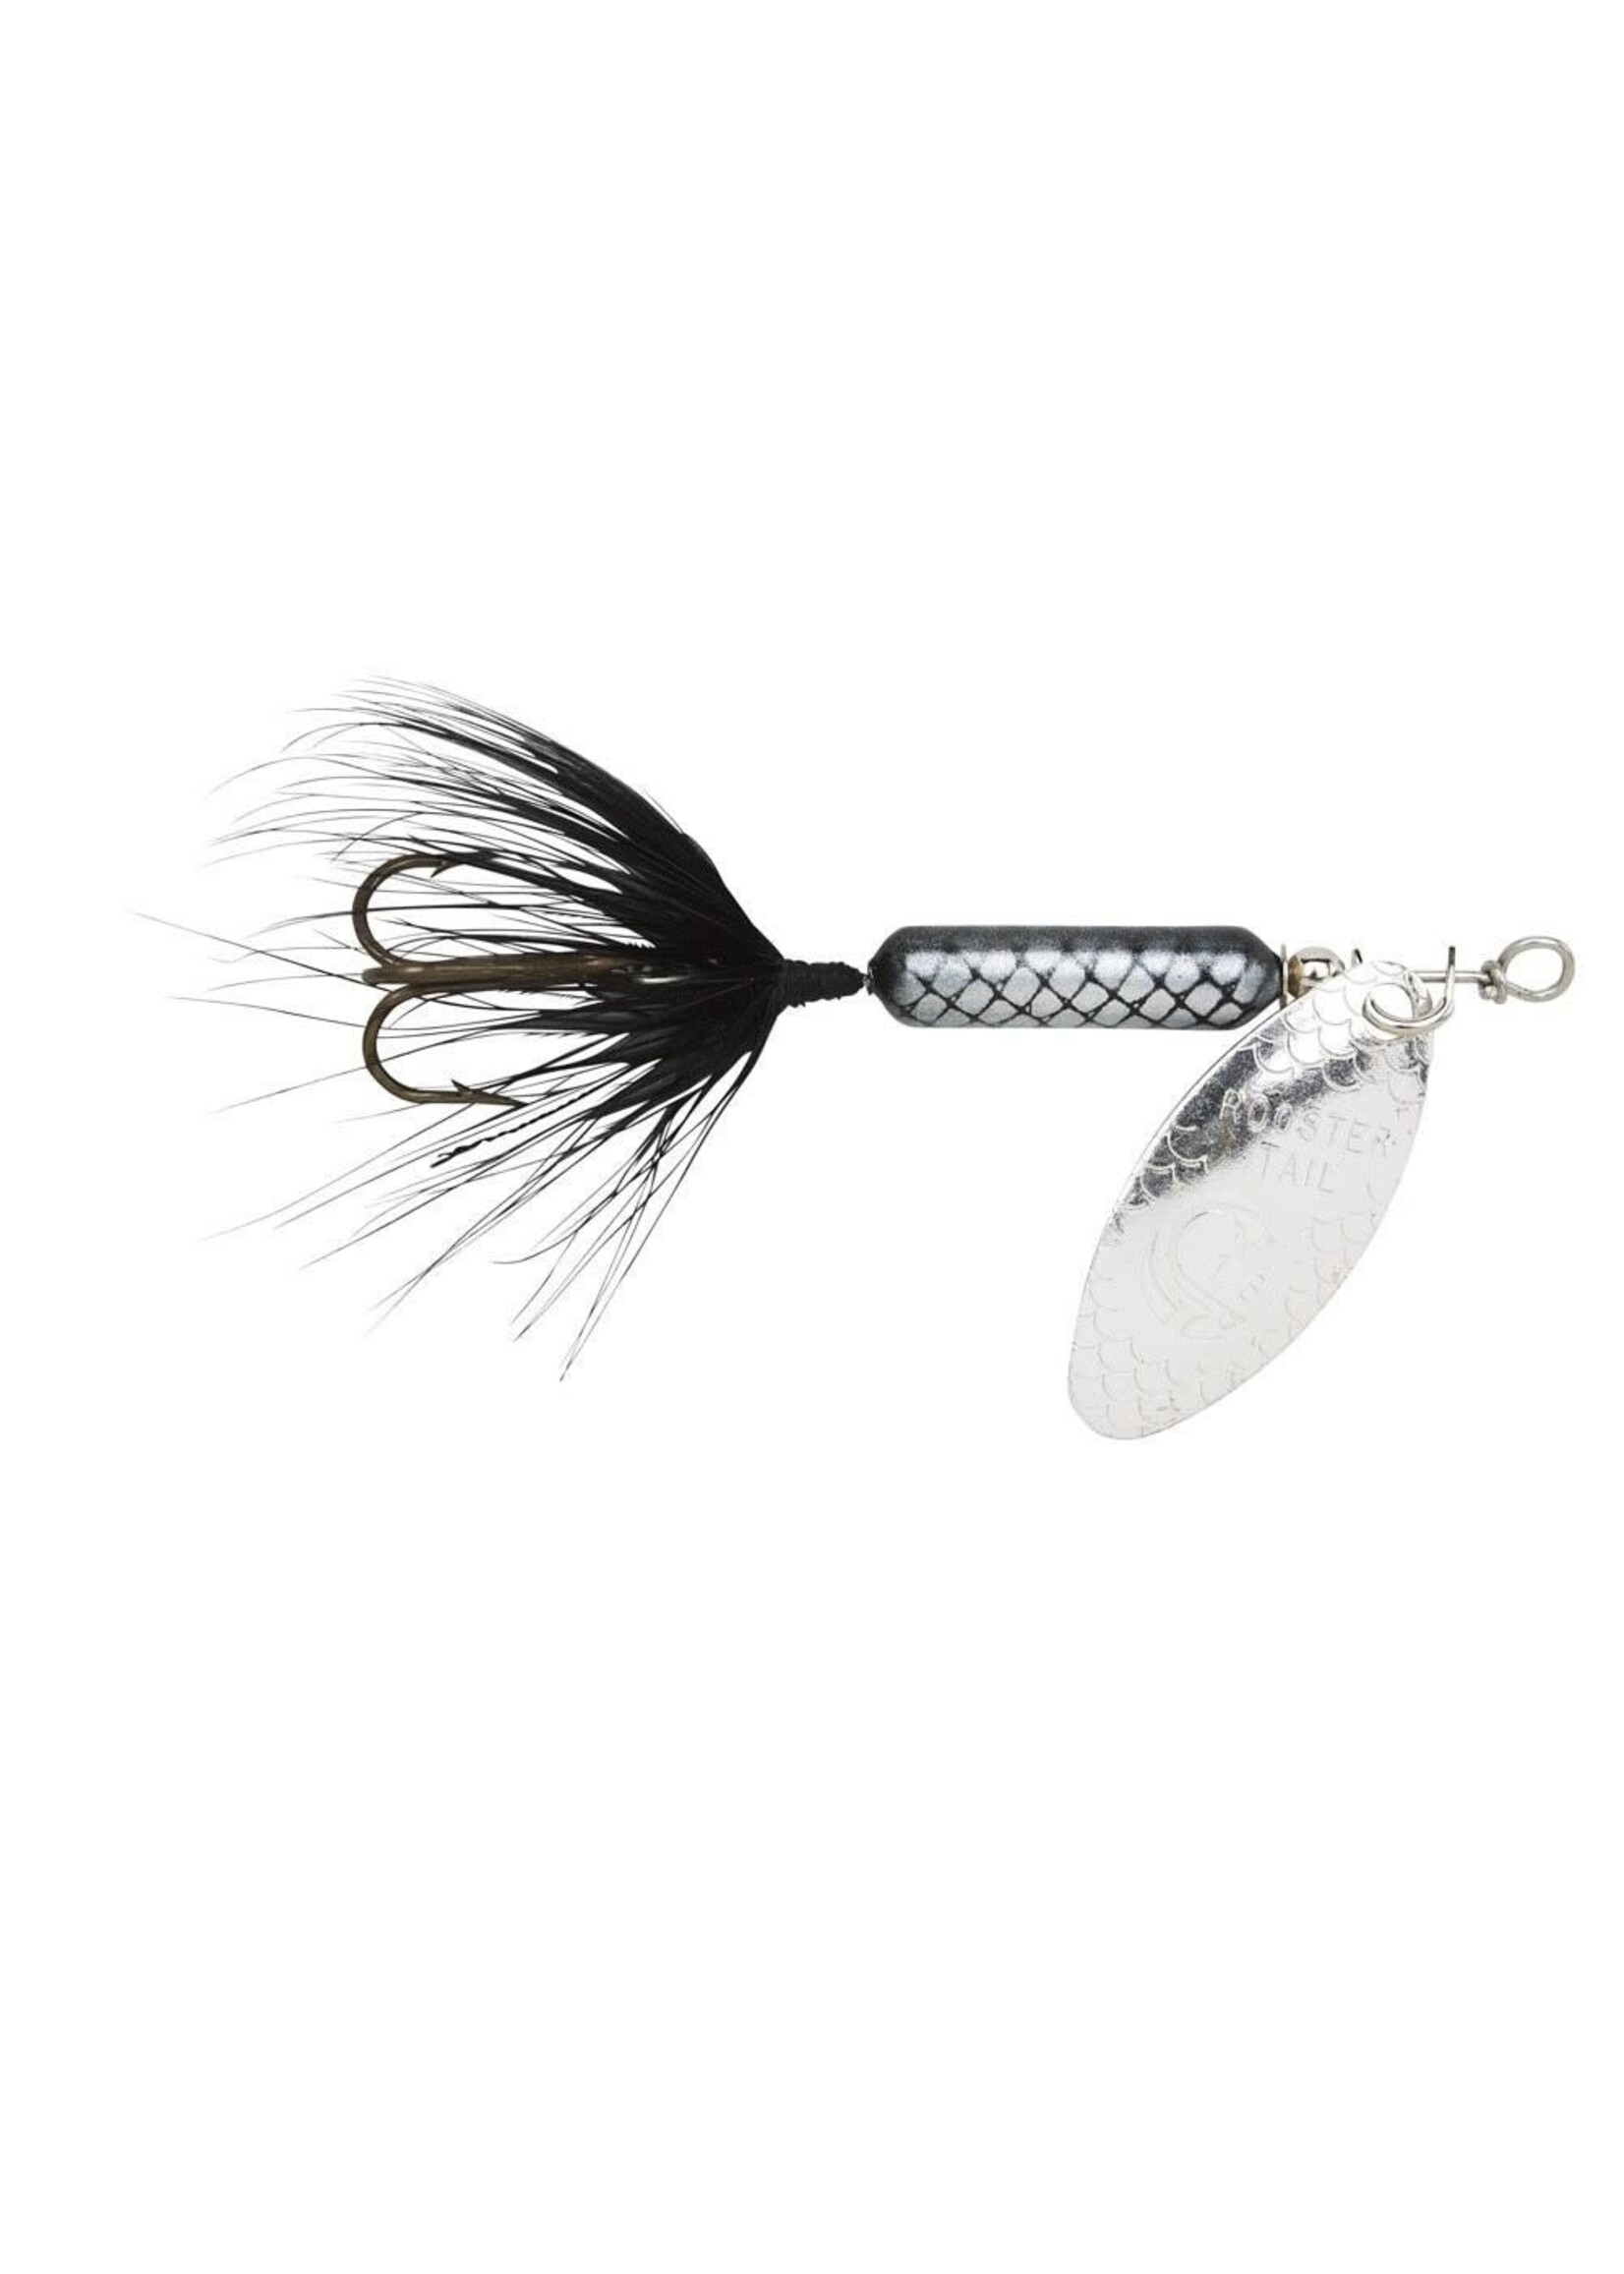 VMSIXVM Rooster Tail Fishing Lures, Spinner Baits Lure for Bass Trout  Salmon Pike, Trout Spinnerbaits Fly Strikers Lure with Brass Spinner Blade  for Freshwater Saltwater A4-12pcs-1/4oz